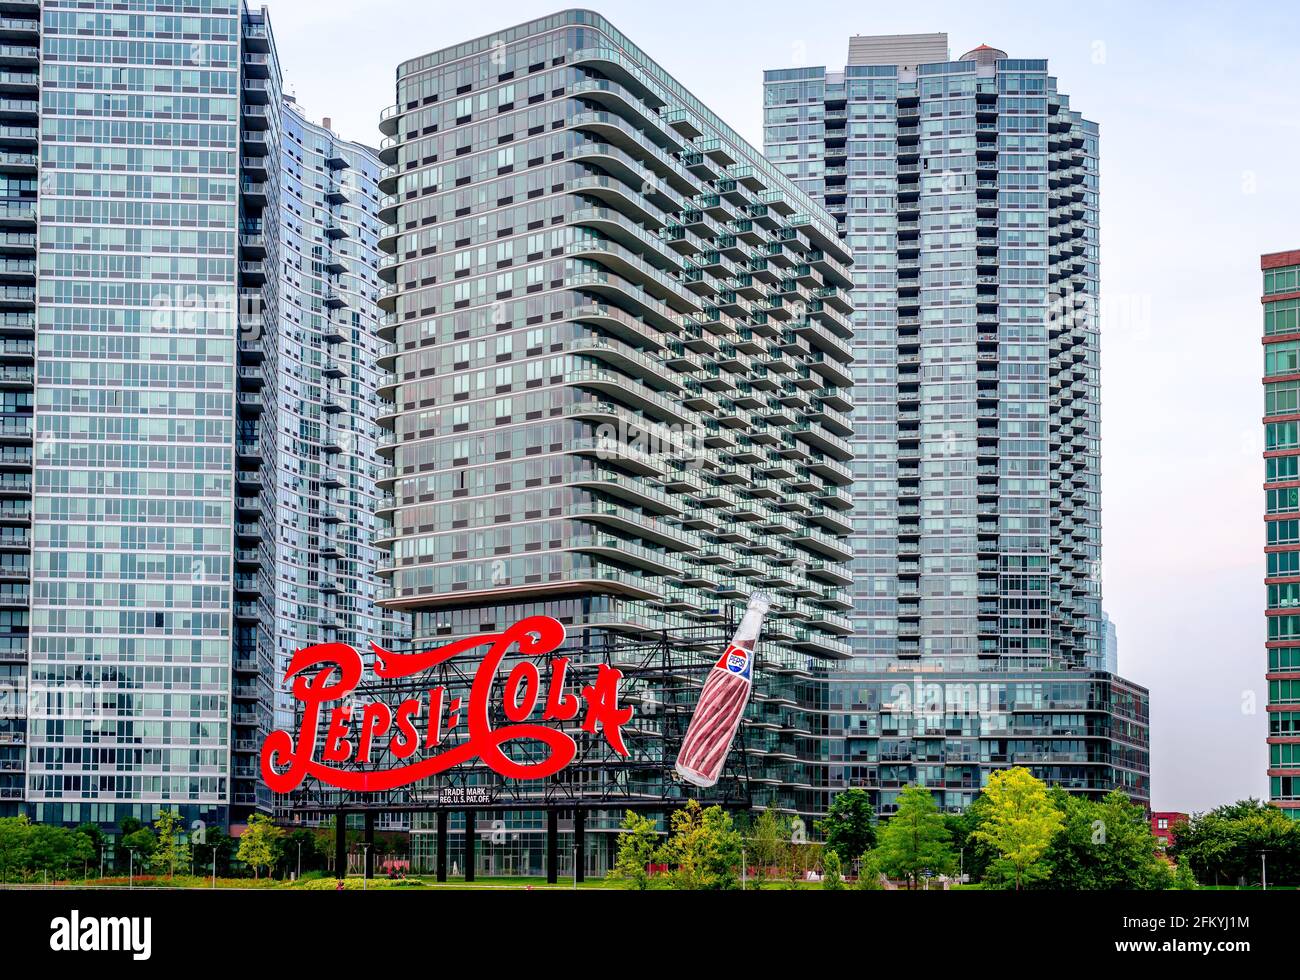 Pepsi Cola sign at Gantry Plaza State Park. Seventy six years old and 120 feet long, Queen's Pepsi Cola sign has long been a key landmark. Stock Photo